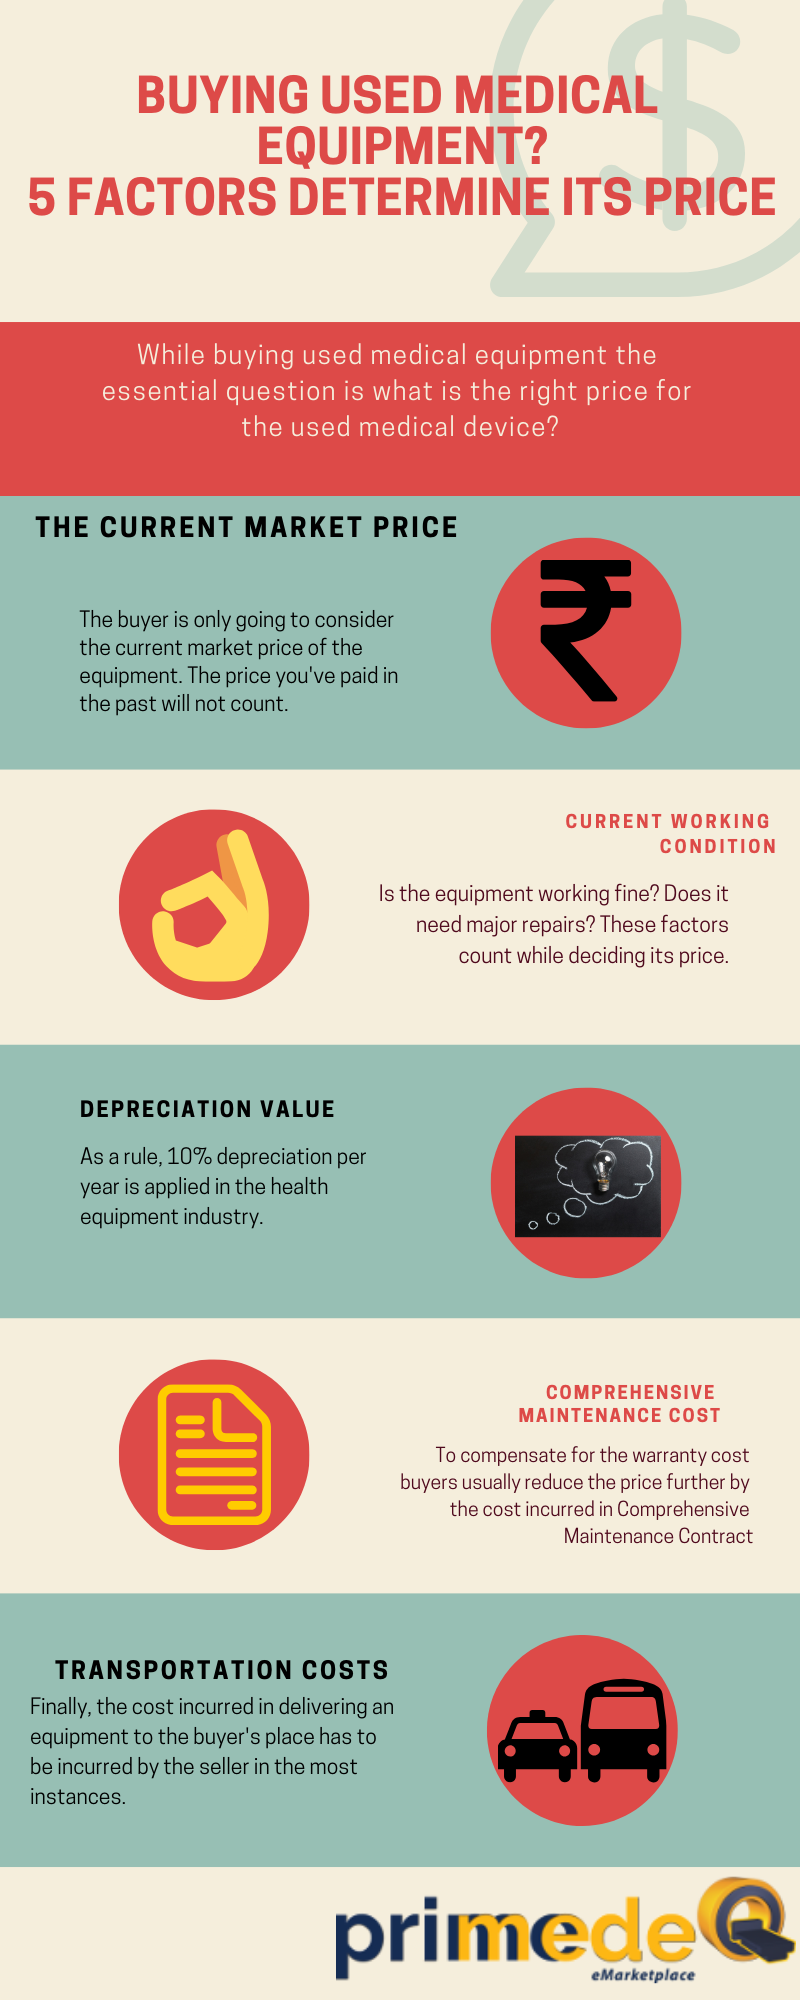 PrimedeQ Infographic on how to decide price of used medical equipment